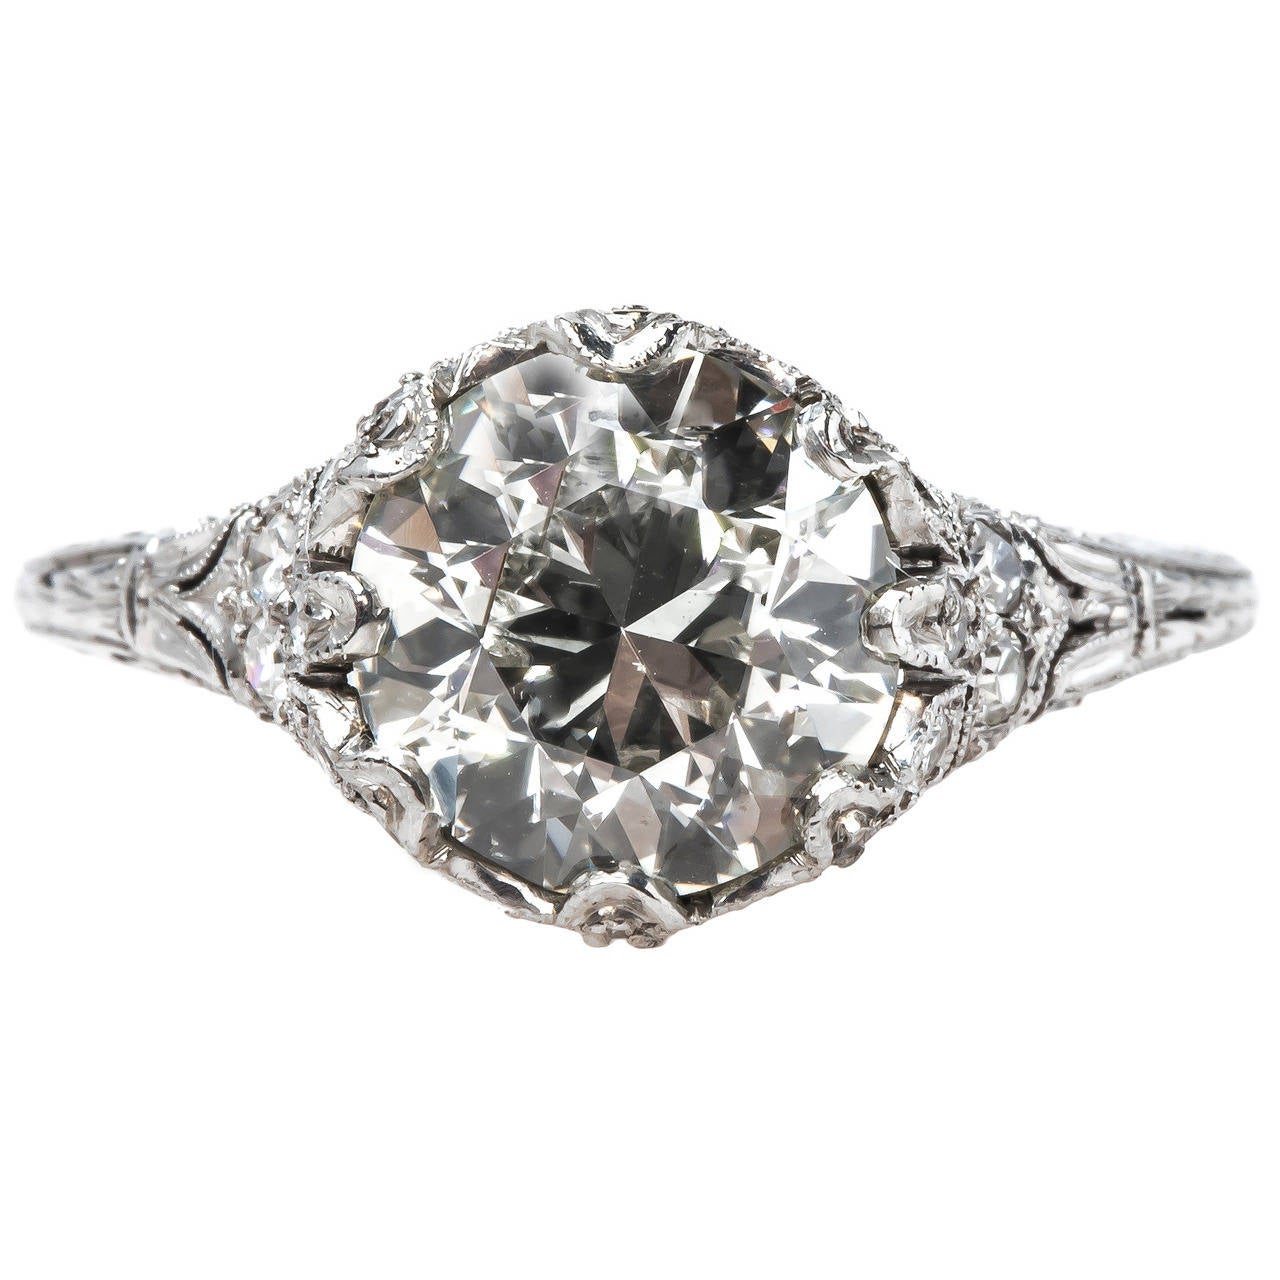 Incredible Over-the-Top Edwardian Diamond Platinum Engagement Ring